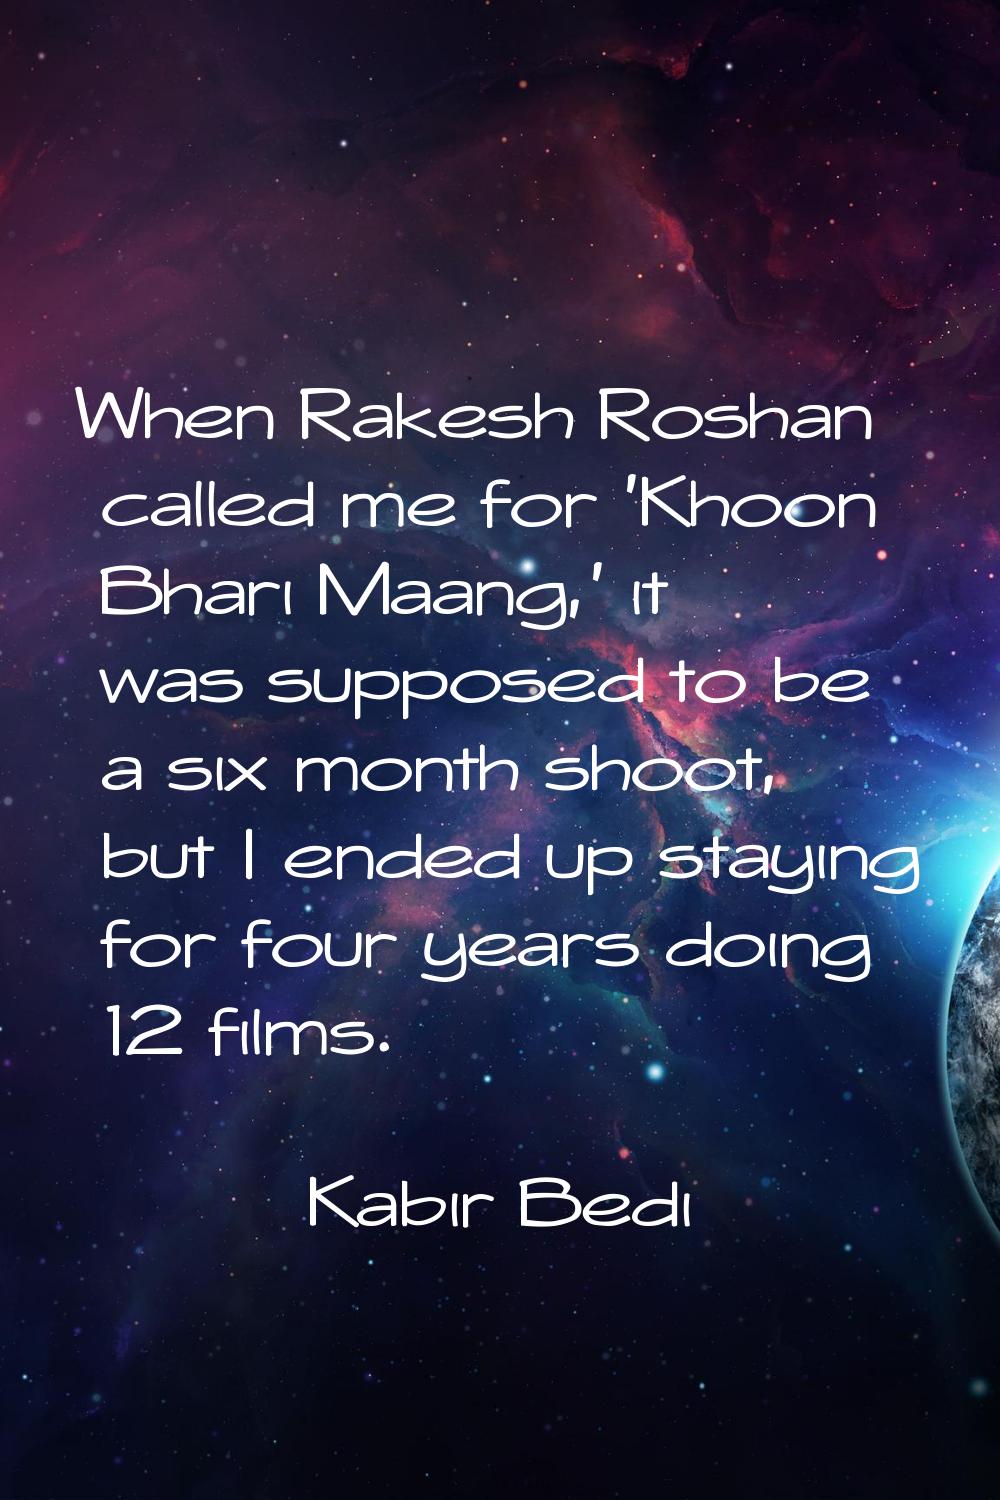 When Rakesh Roshan called me for 'Khoon Bhari Maang,' it was supposed to be a six month shoot, but 